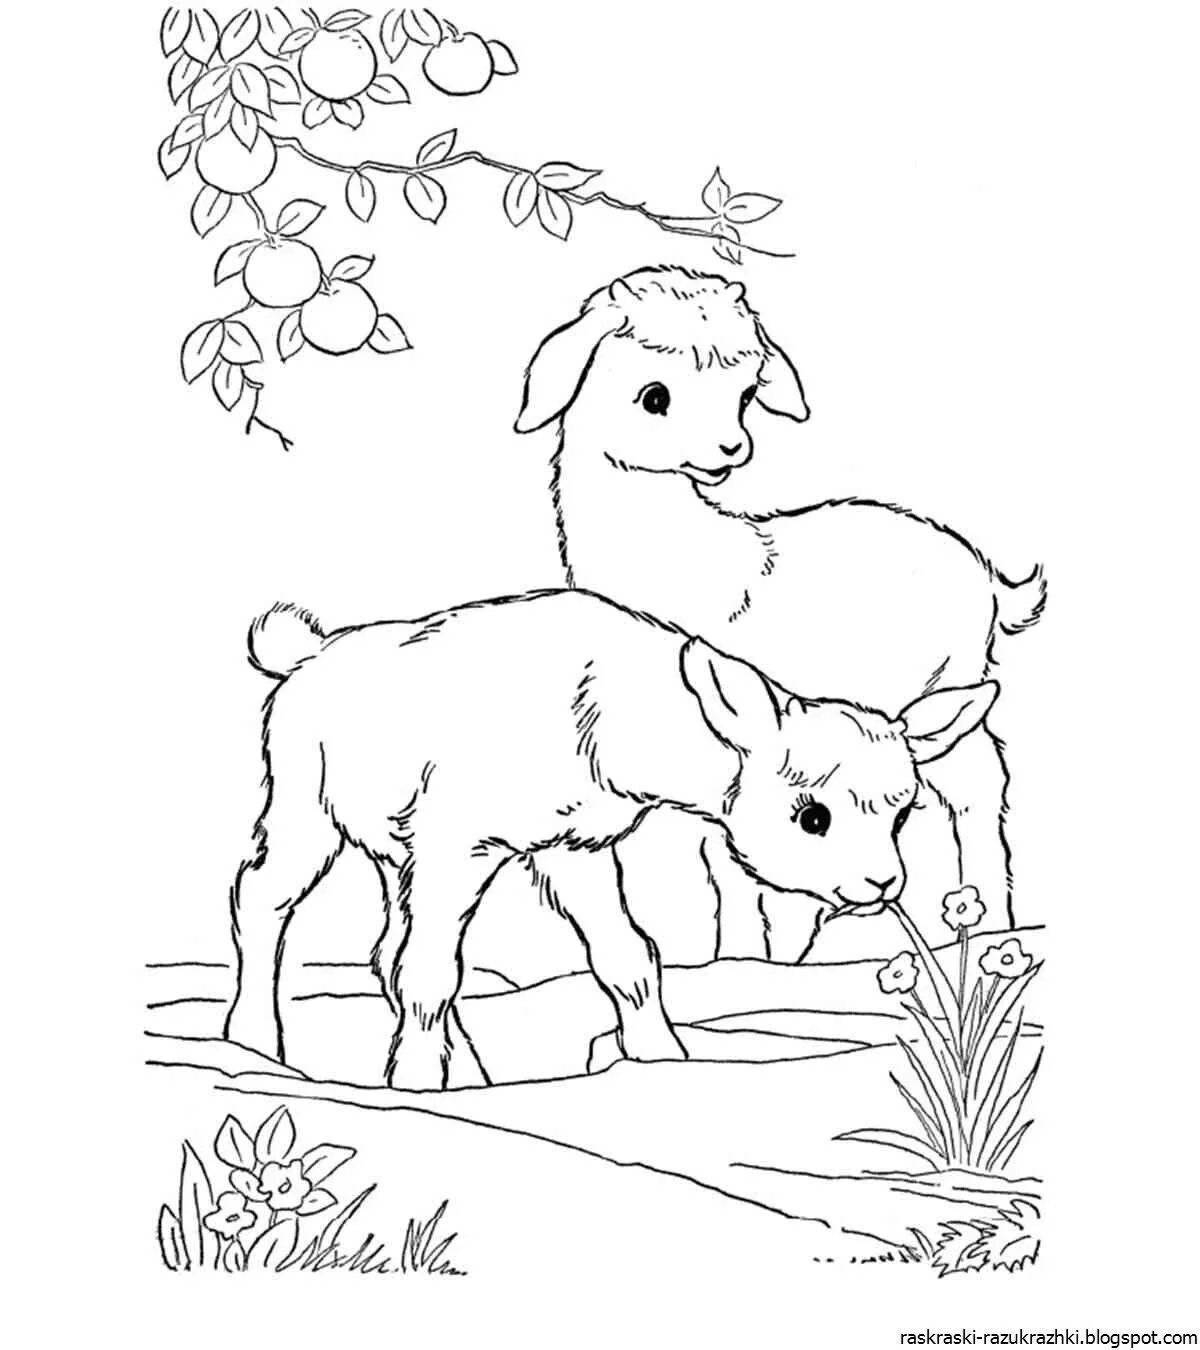 Fluffy coloring pages for kids